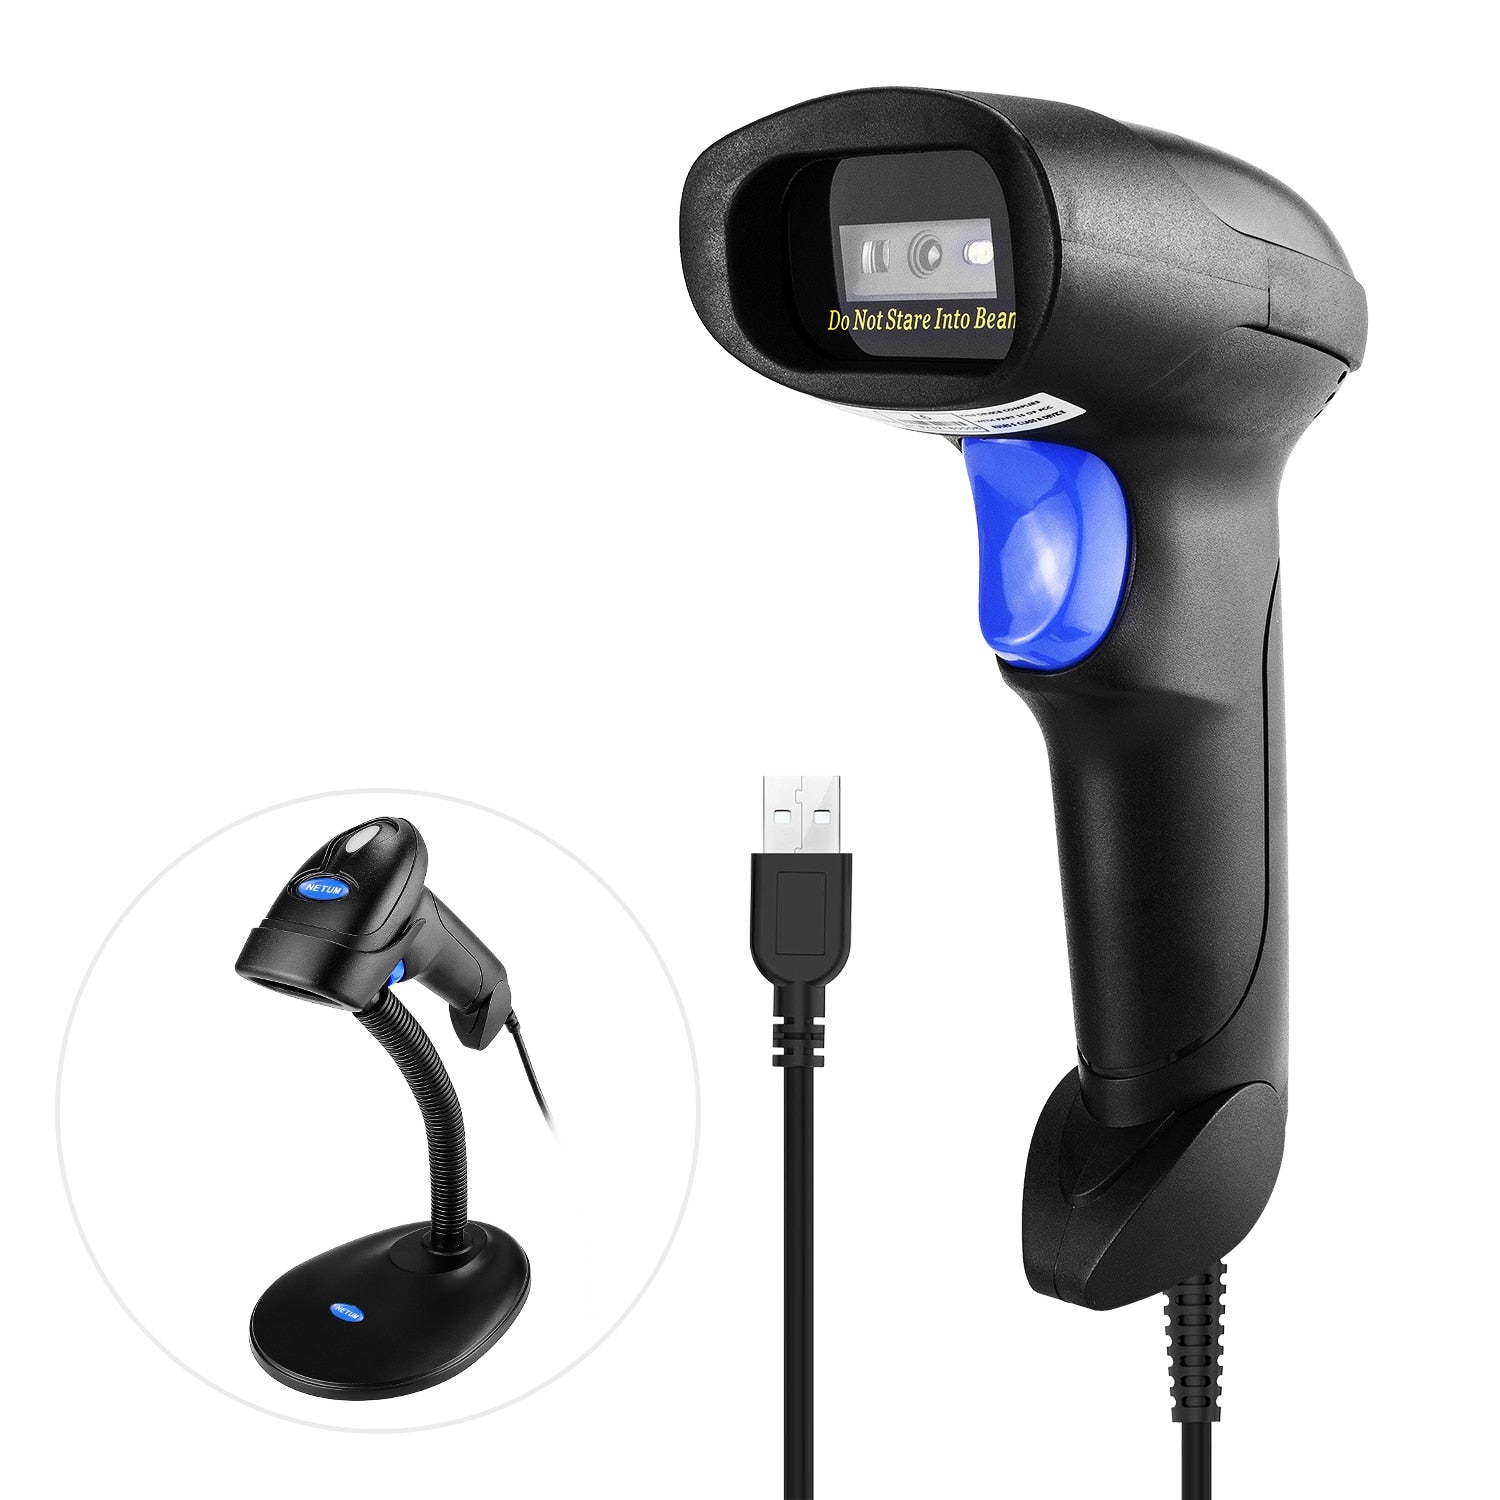 NETUM L8 Wireless 2D Barcode Scanner and L5 Wired 1D/2D QR Bar Code Reader PDF417 for Inventory POS Terminal